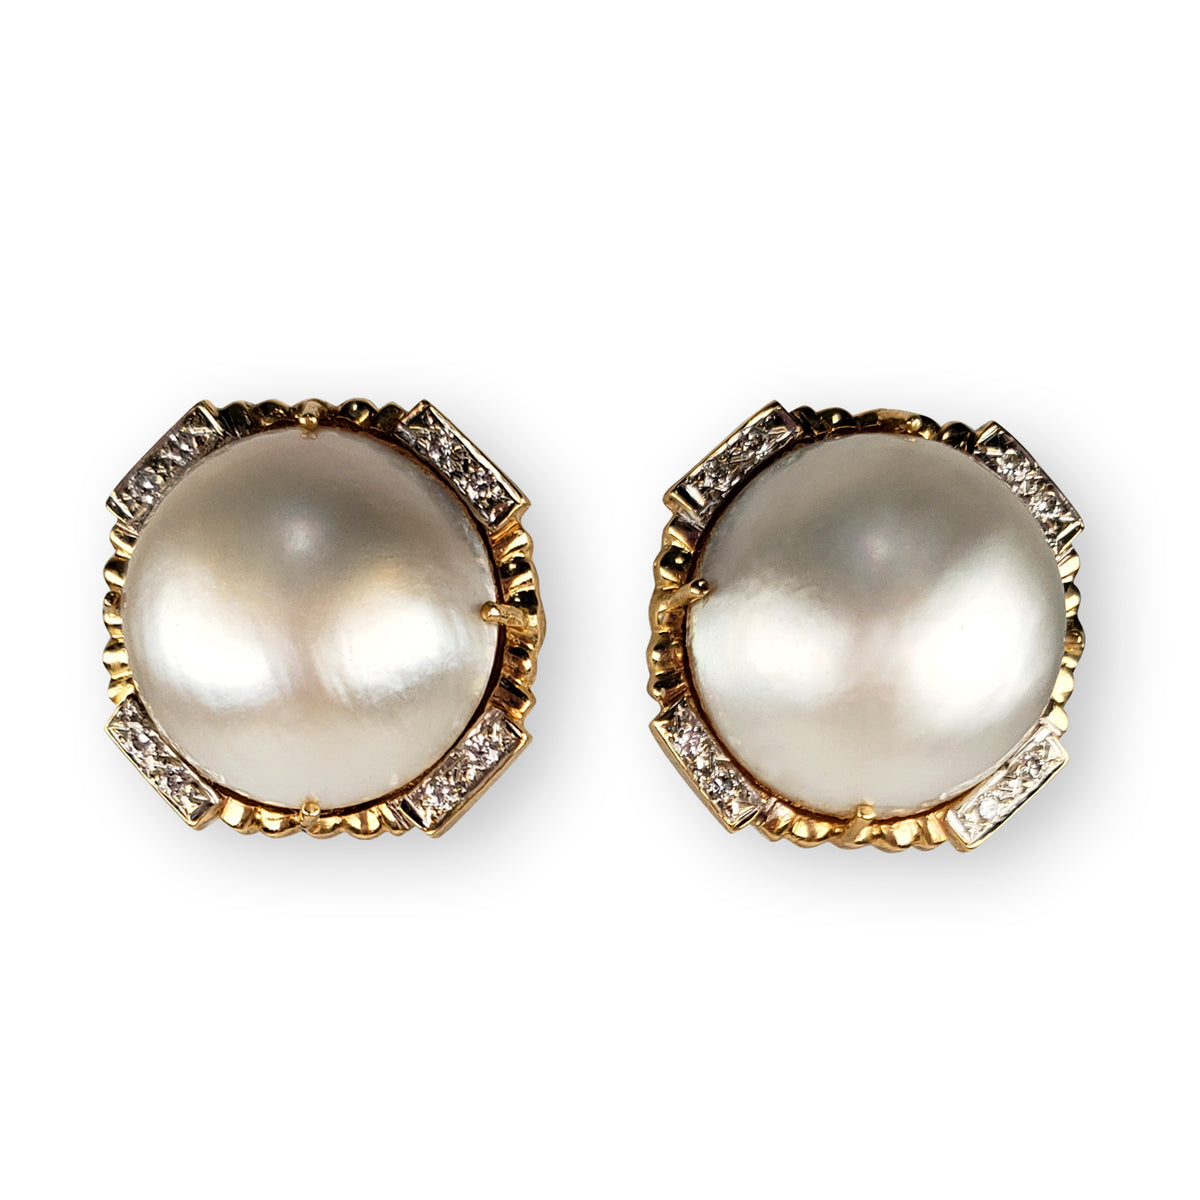 15.25 mm Mabe Pearl Earrings w/ omega clip made in 14-karat yellow gold